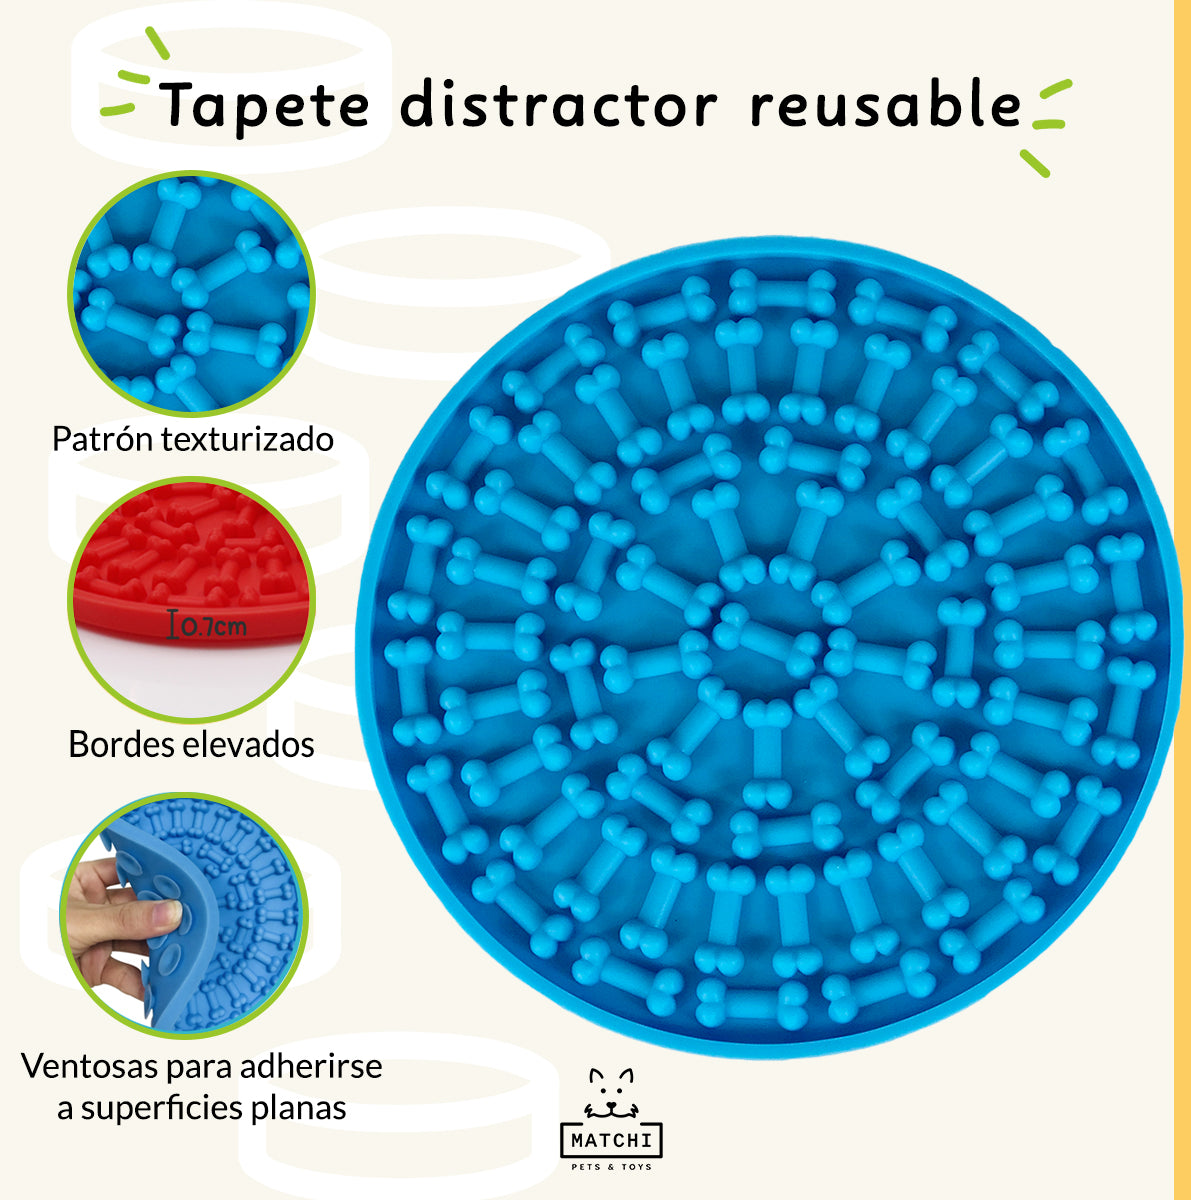 Tapete Distractor Reusable